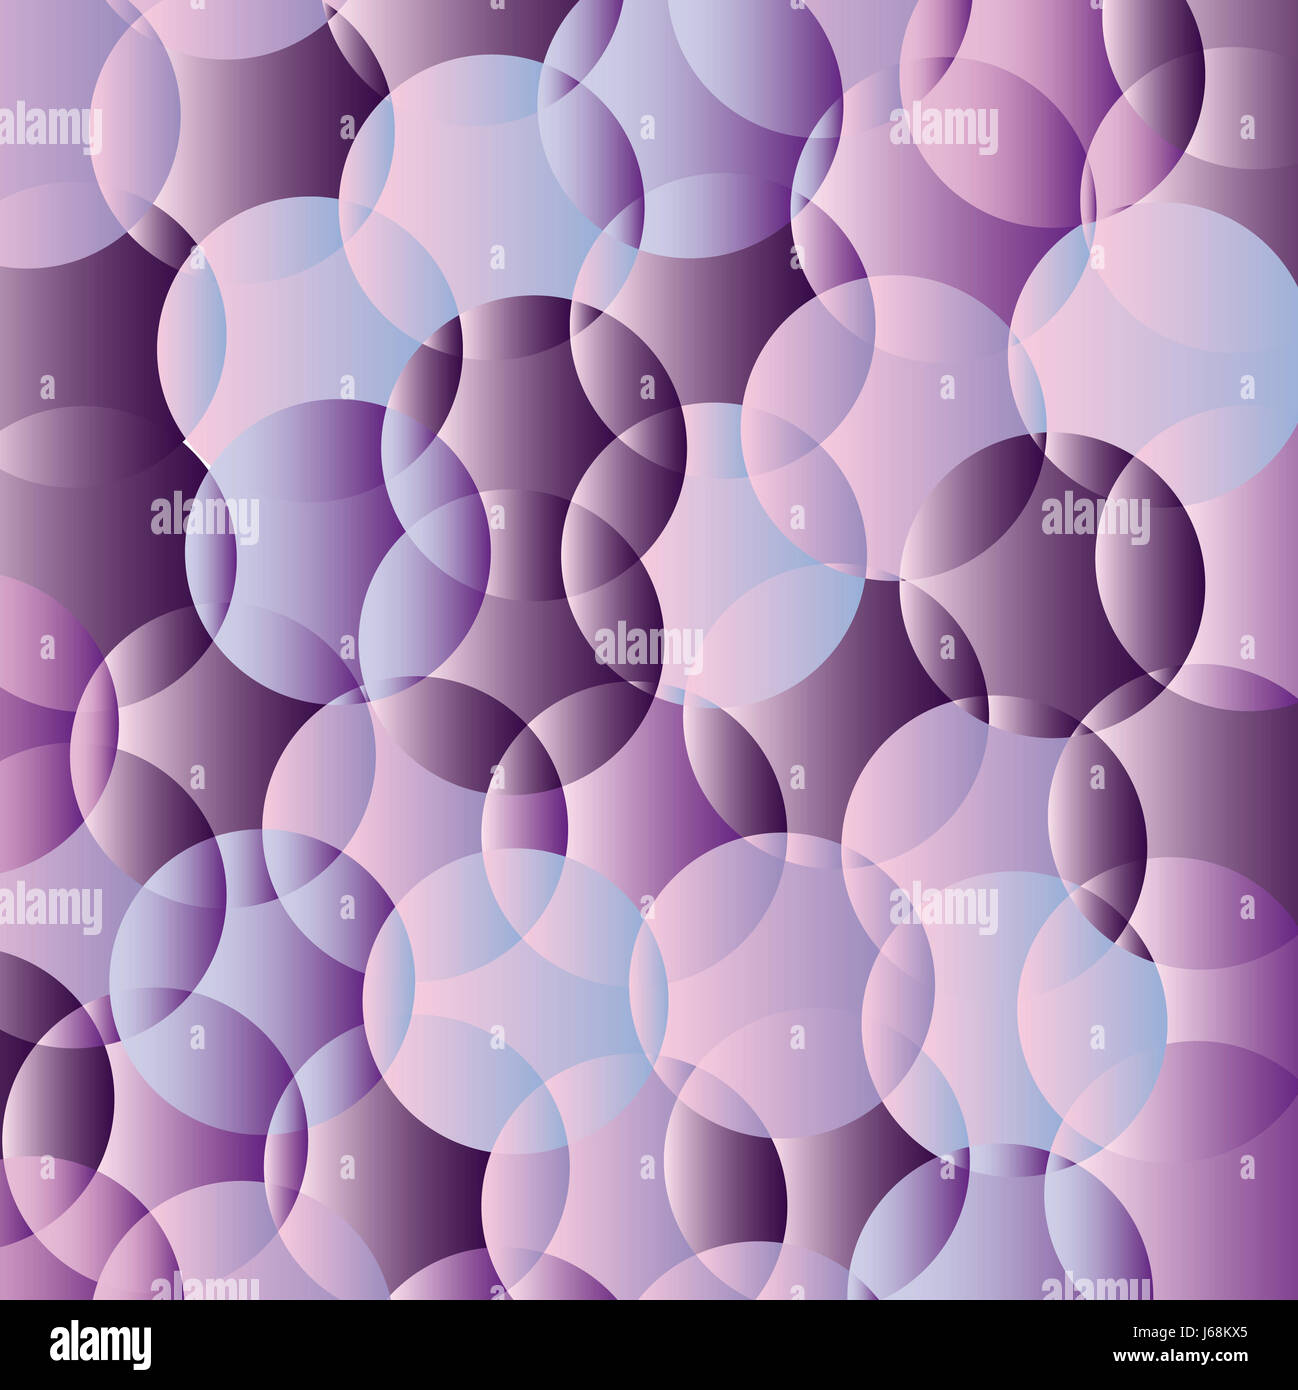 blue art round about purple circle overlapping backdrop background pink blue Stock Photo